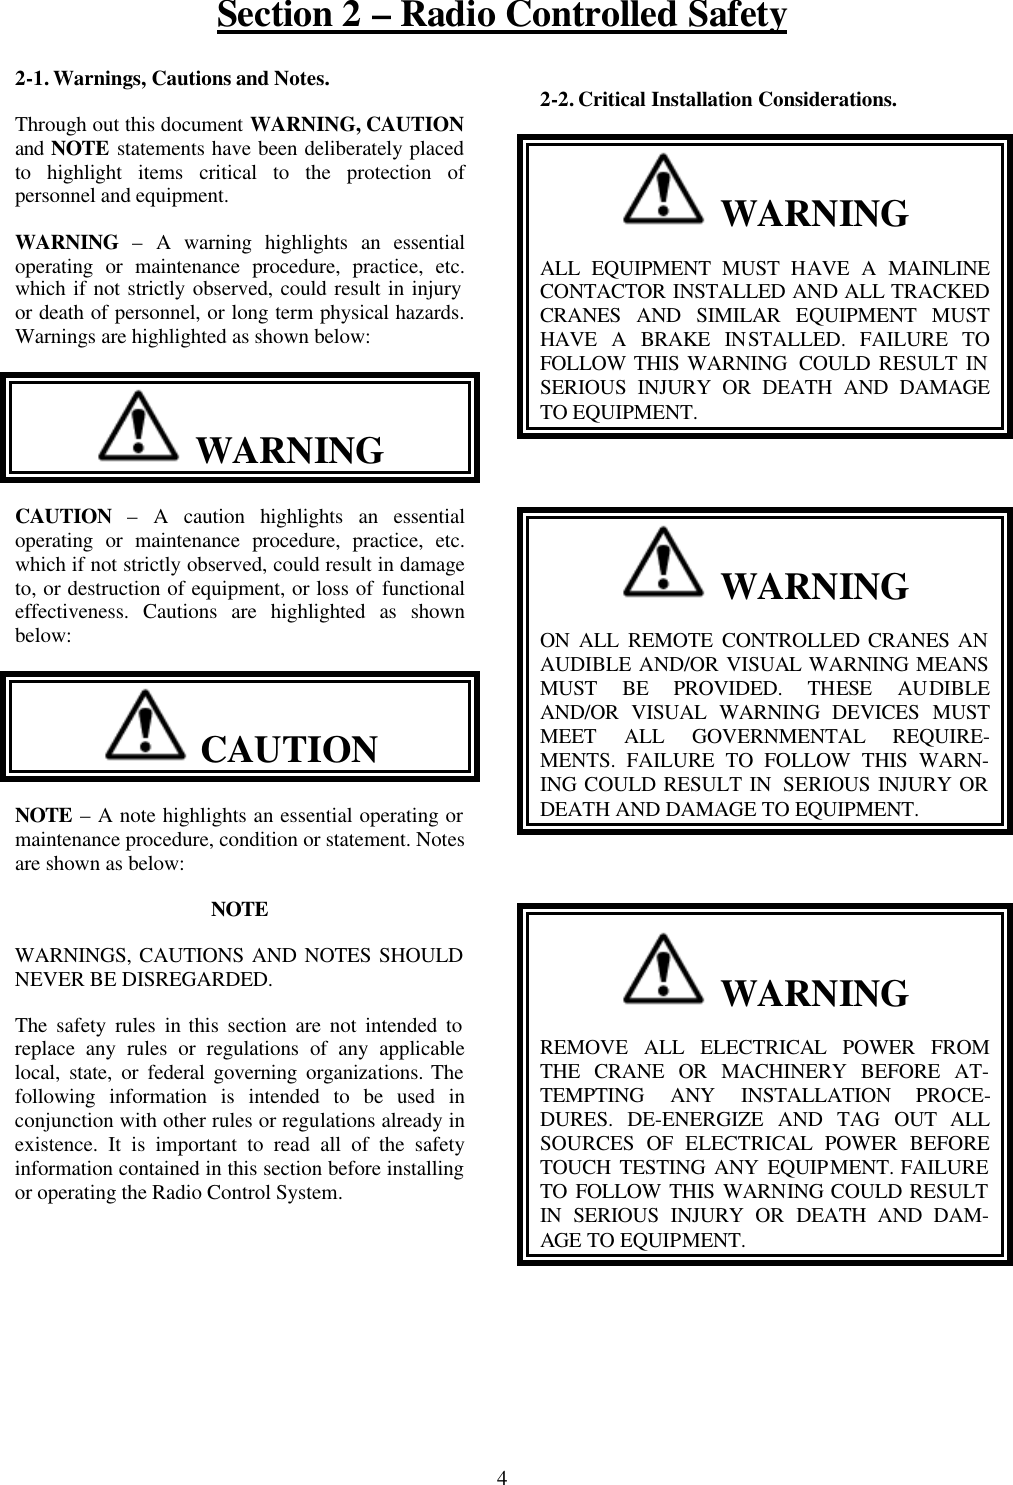 Section 2 – Radio Controlled Safety 4 2-1. Warnings, Cautions and Notes. Through out this document WARNING, CAUTION and NOTE statements have been deliberately placed to highlight items critical to the protection of personnel and equipment. WARNING – A warning highlights an essential operating or maintenance procedure, practice, etc. which if not strictly observed, could result in injury or death of personnel, or long term physical hazards. Warnings are highlighted as shown below:   WARNING CAUTION – A caution highlights an essential operating or maintenance procedure, practice, etc. which if not strictly observed, could result in damage to, or destruction of equipment, or loss of functional effectiveness. Cautions are highlighted as shown below:   CAUTION  NOTE – A note highlights an essential operating or maintenance procedure, condition or statement. Notes are shown as below: NOTE WARNINGS, CAUTIONS AND NOTES SHOULD NEVER BE DISREGARDED. The safety rules in this section are not intended to replace any rules or regulations of any applicable local, state, or federal governing organizations. The following information is intended to be used in conjunction with other rules or regulations already in existence. It is important to read all of the safety information contained in this section before installing or operating the Radio Control System. 2-2. Critical Installation Considerations.   WARNING ALL EQUIPMENT MUST HAVE A MAINLINE CONTACTOR INSTALLED AND ALL TRACKED CRANES AND SIMILAR EQUIPMENT MUST HAVE A BRAKE INSTALLED. FAILURE TO FOLLOW THIS WARNING  COULD RESULT IN SERIOUS INJURY OR DEATH AND DAMAGE TO EQUIPMENT.    WARNING ON ALL REMOTE CONTROLLED CRANES AN AUDIBLE AND/OR VISUAL WARNING MEANS MUST BE PROVIDED. THESE AUDIBLE AND/OR VISUAL WARNING DEVICES MUST MEET ALL GOVERNMENTAL REQUIRE-MENTS. FAILURE TO FOLLOW THIS WARN-ING COULD RESULT IN  SERIOUS INJURY OR DEATH AND DAMAGE TO EQUIPMENT.    WARNING REMOVE ALL ELECTRICAL POWER FROM THE CRANE OR MACHINERY BEFORE AT-TEMPTING ANY INSTALLATION PROCE-DURES. DE-ENERGIZE AND TAG OUT ALL SOURCES OF ELECTRICAL POWER BEFORE TOUCH TESTING ANY EQUIPMENT. FAILURE TO FOLLOW THIS WARNING COULD RESULT IN SERIOUS INJURY OR DEATH AND DAM-AGE TO EQUIPMENT.  